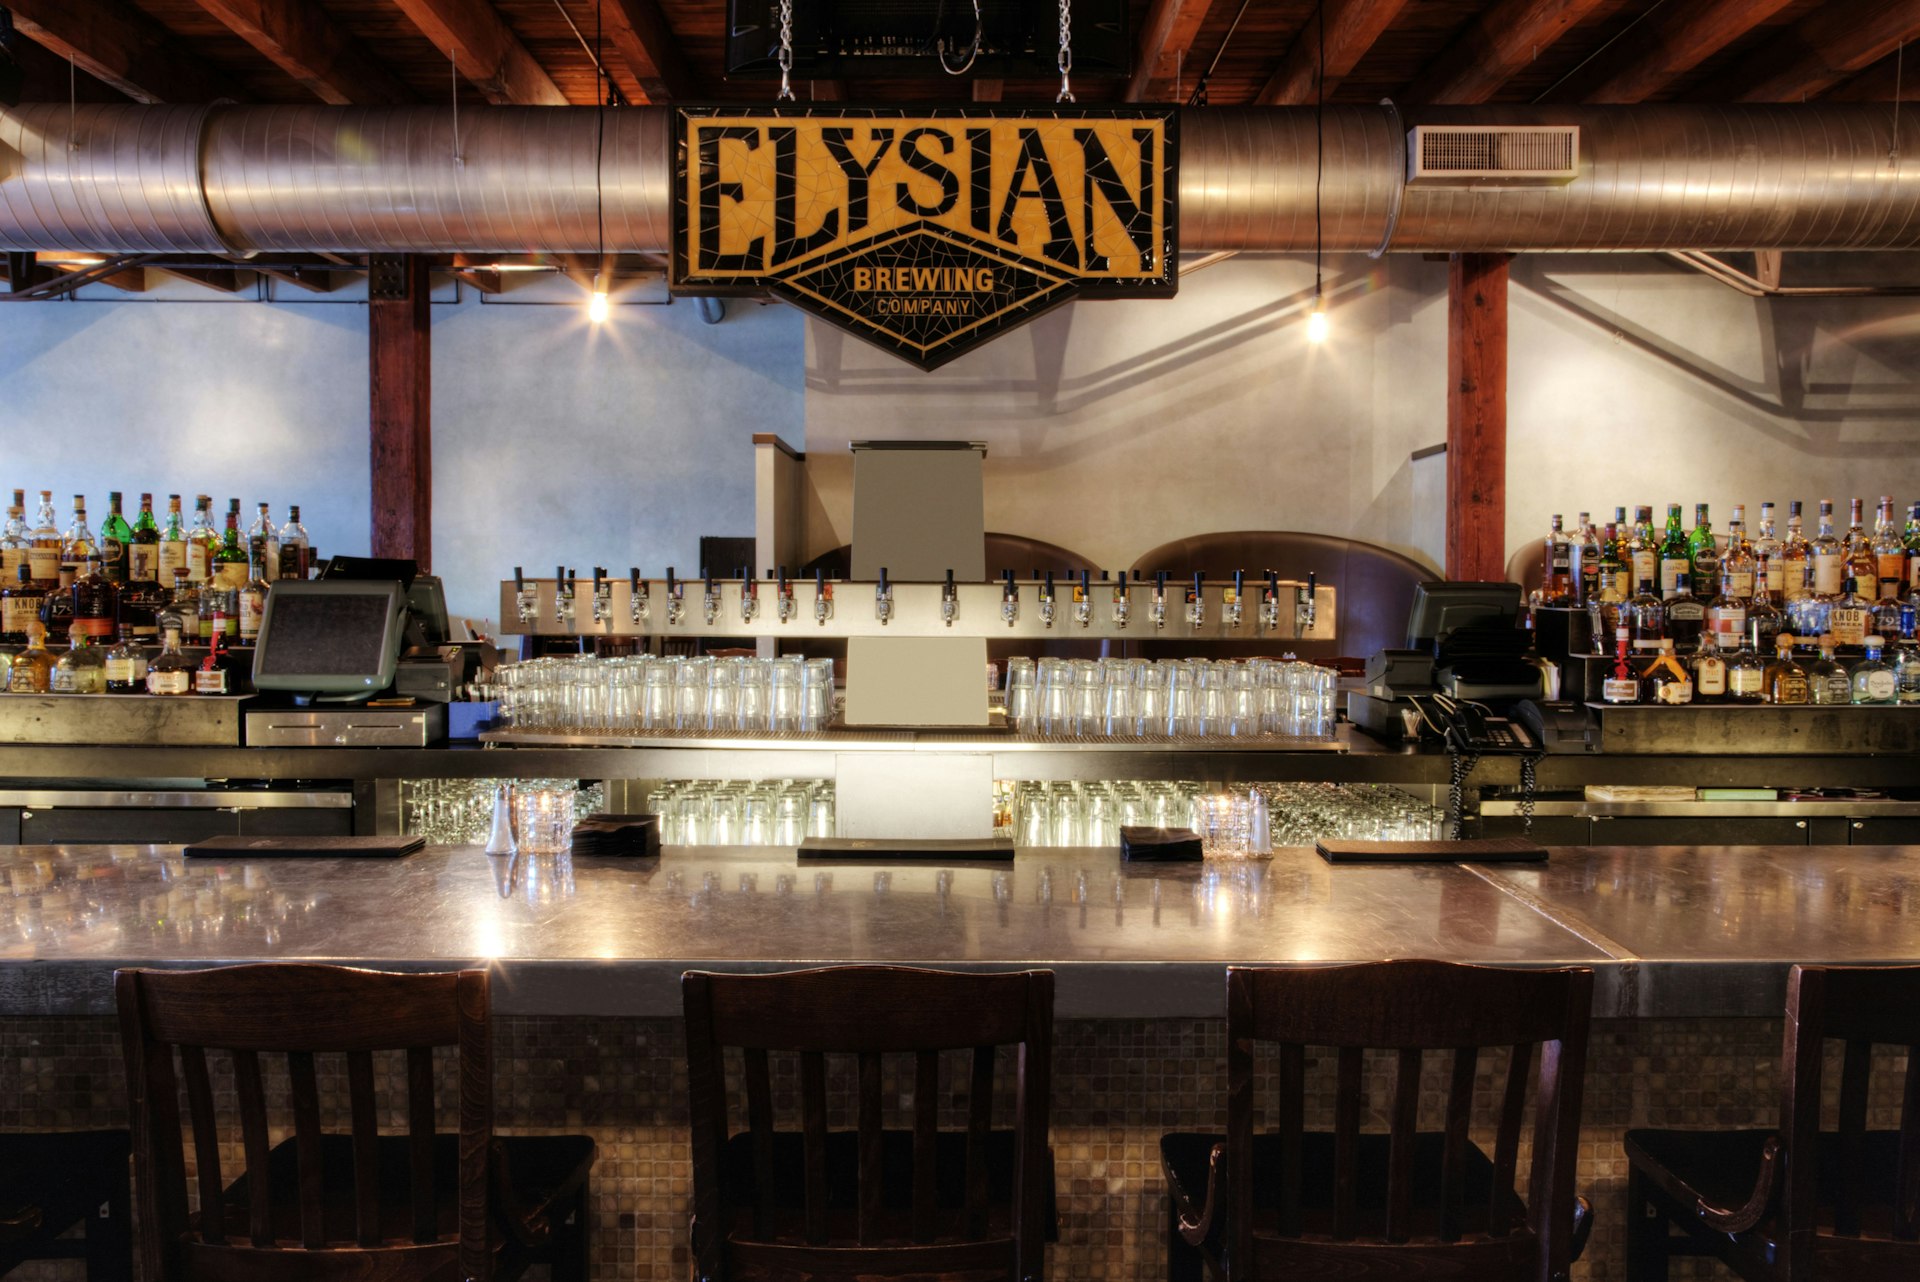 Founded in 1995 Elysian Brewing has gained popularity with its award-winning ales. Image by Spaces Images / Blend Images / Getty